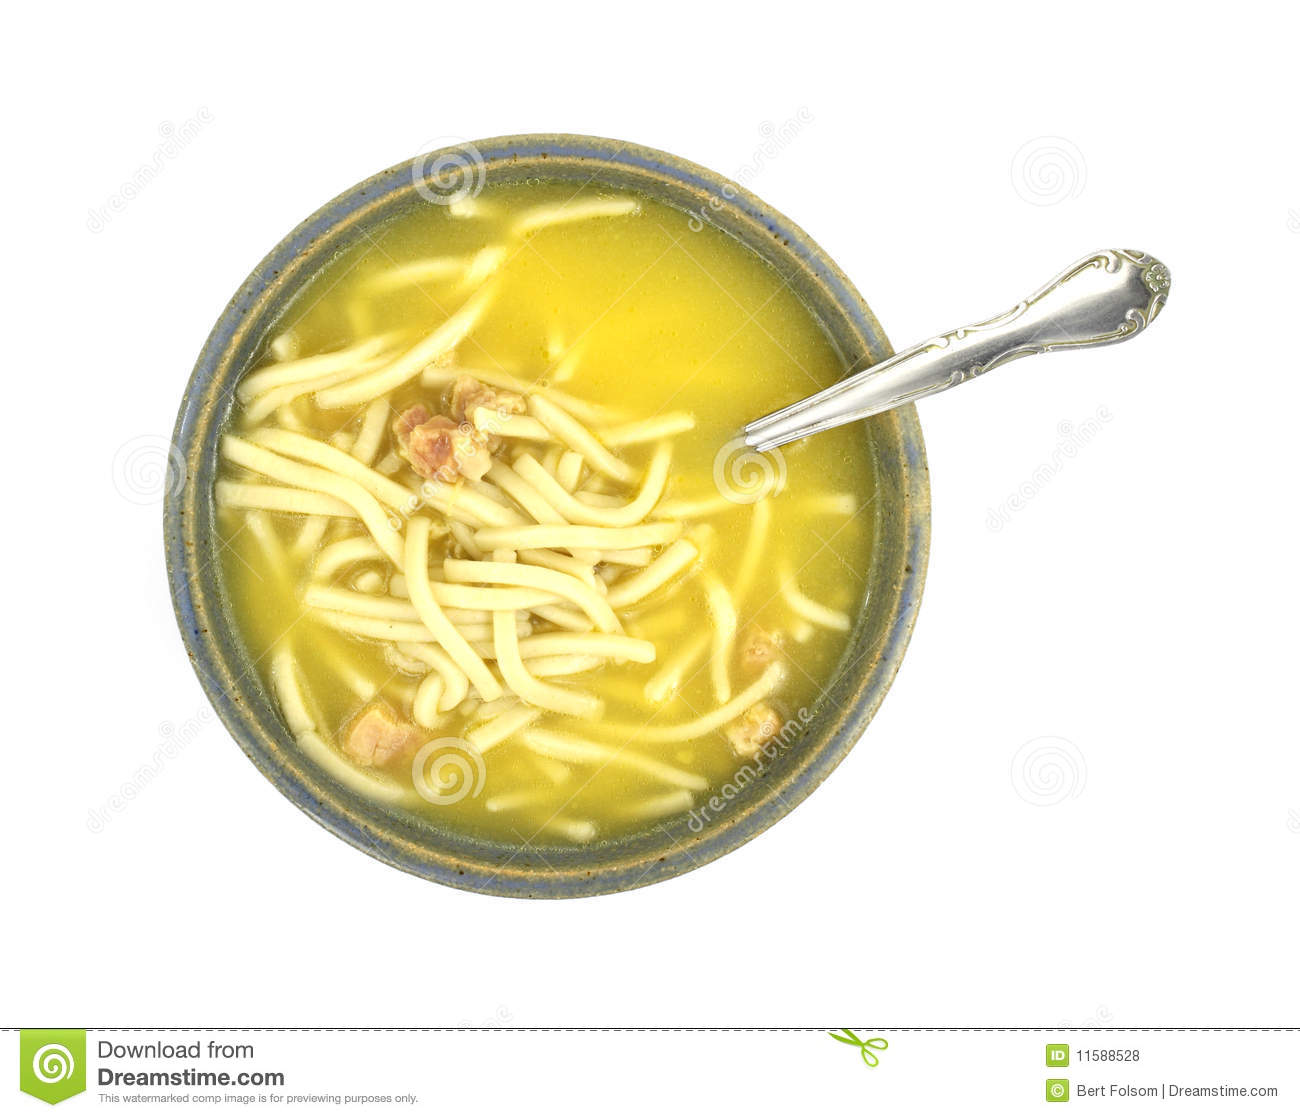 Serving Of Chicken Noodle Soup In A Colorful Dish With Spoon Against